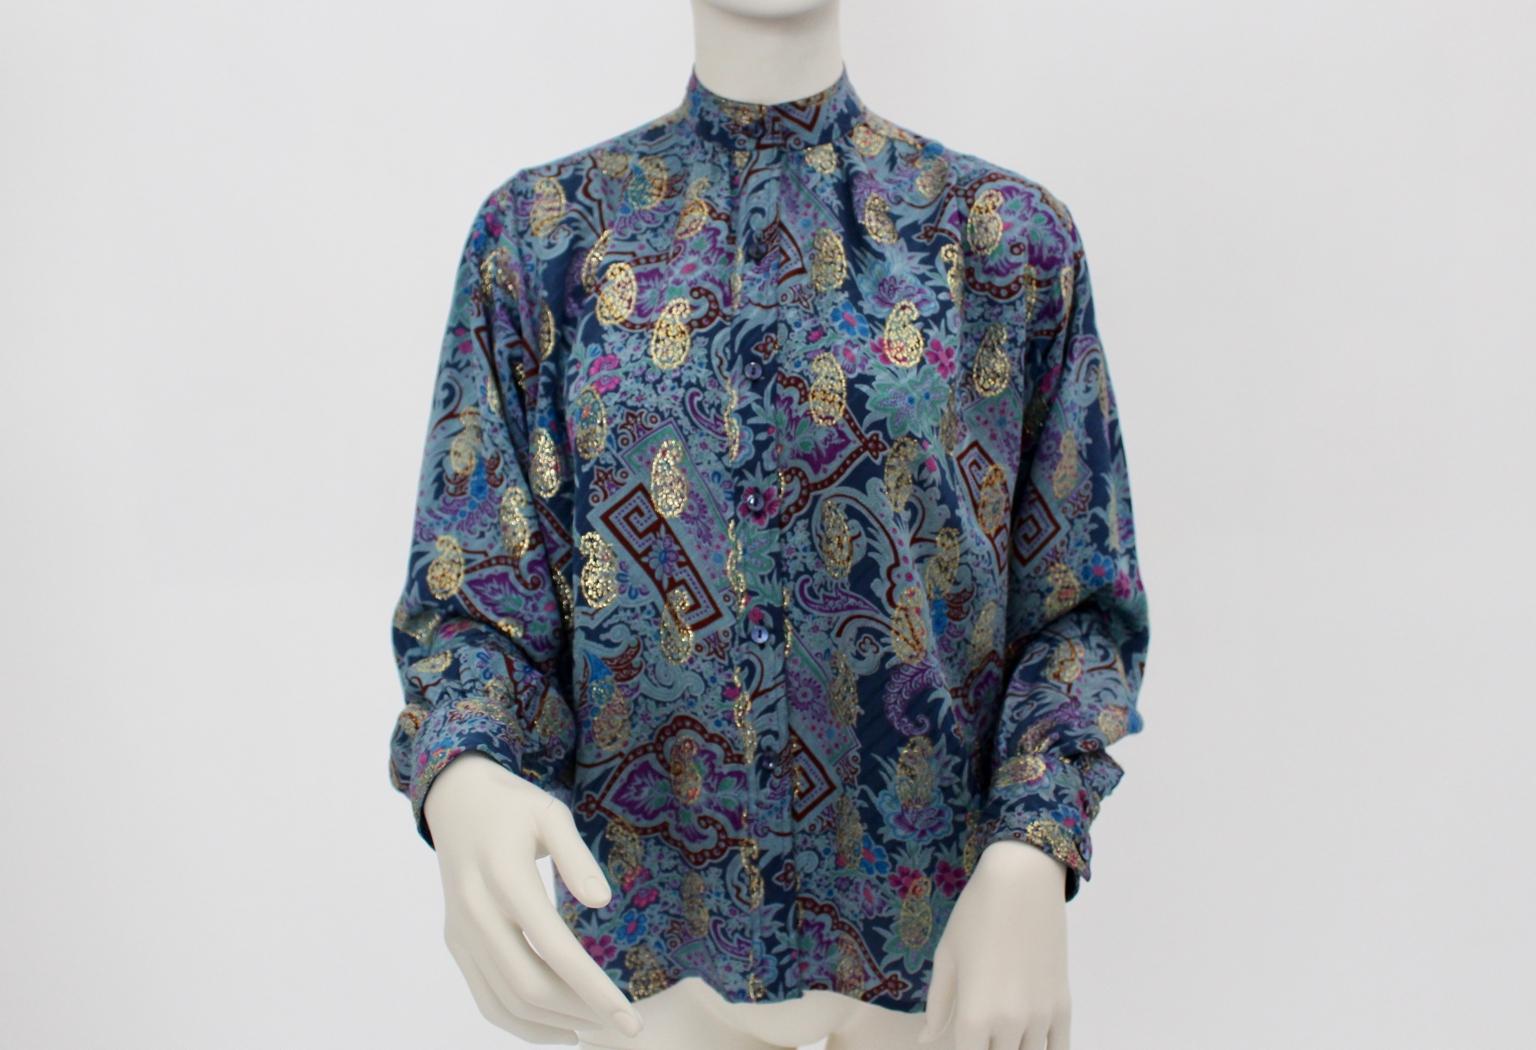 This blouse was designed in the 1980s and made in France. The standing collar blouse impresses through its vibrant colors in blue and paisley pattern.
This exotic pattern was typically for the young 1980s.
Front button closure
Very good vintage